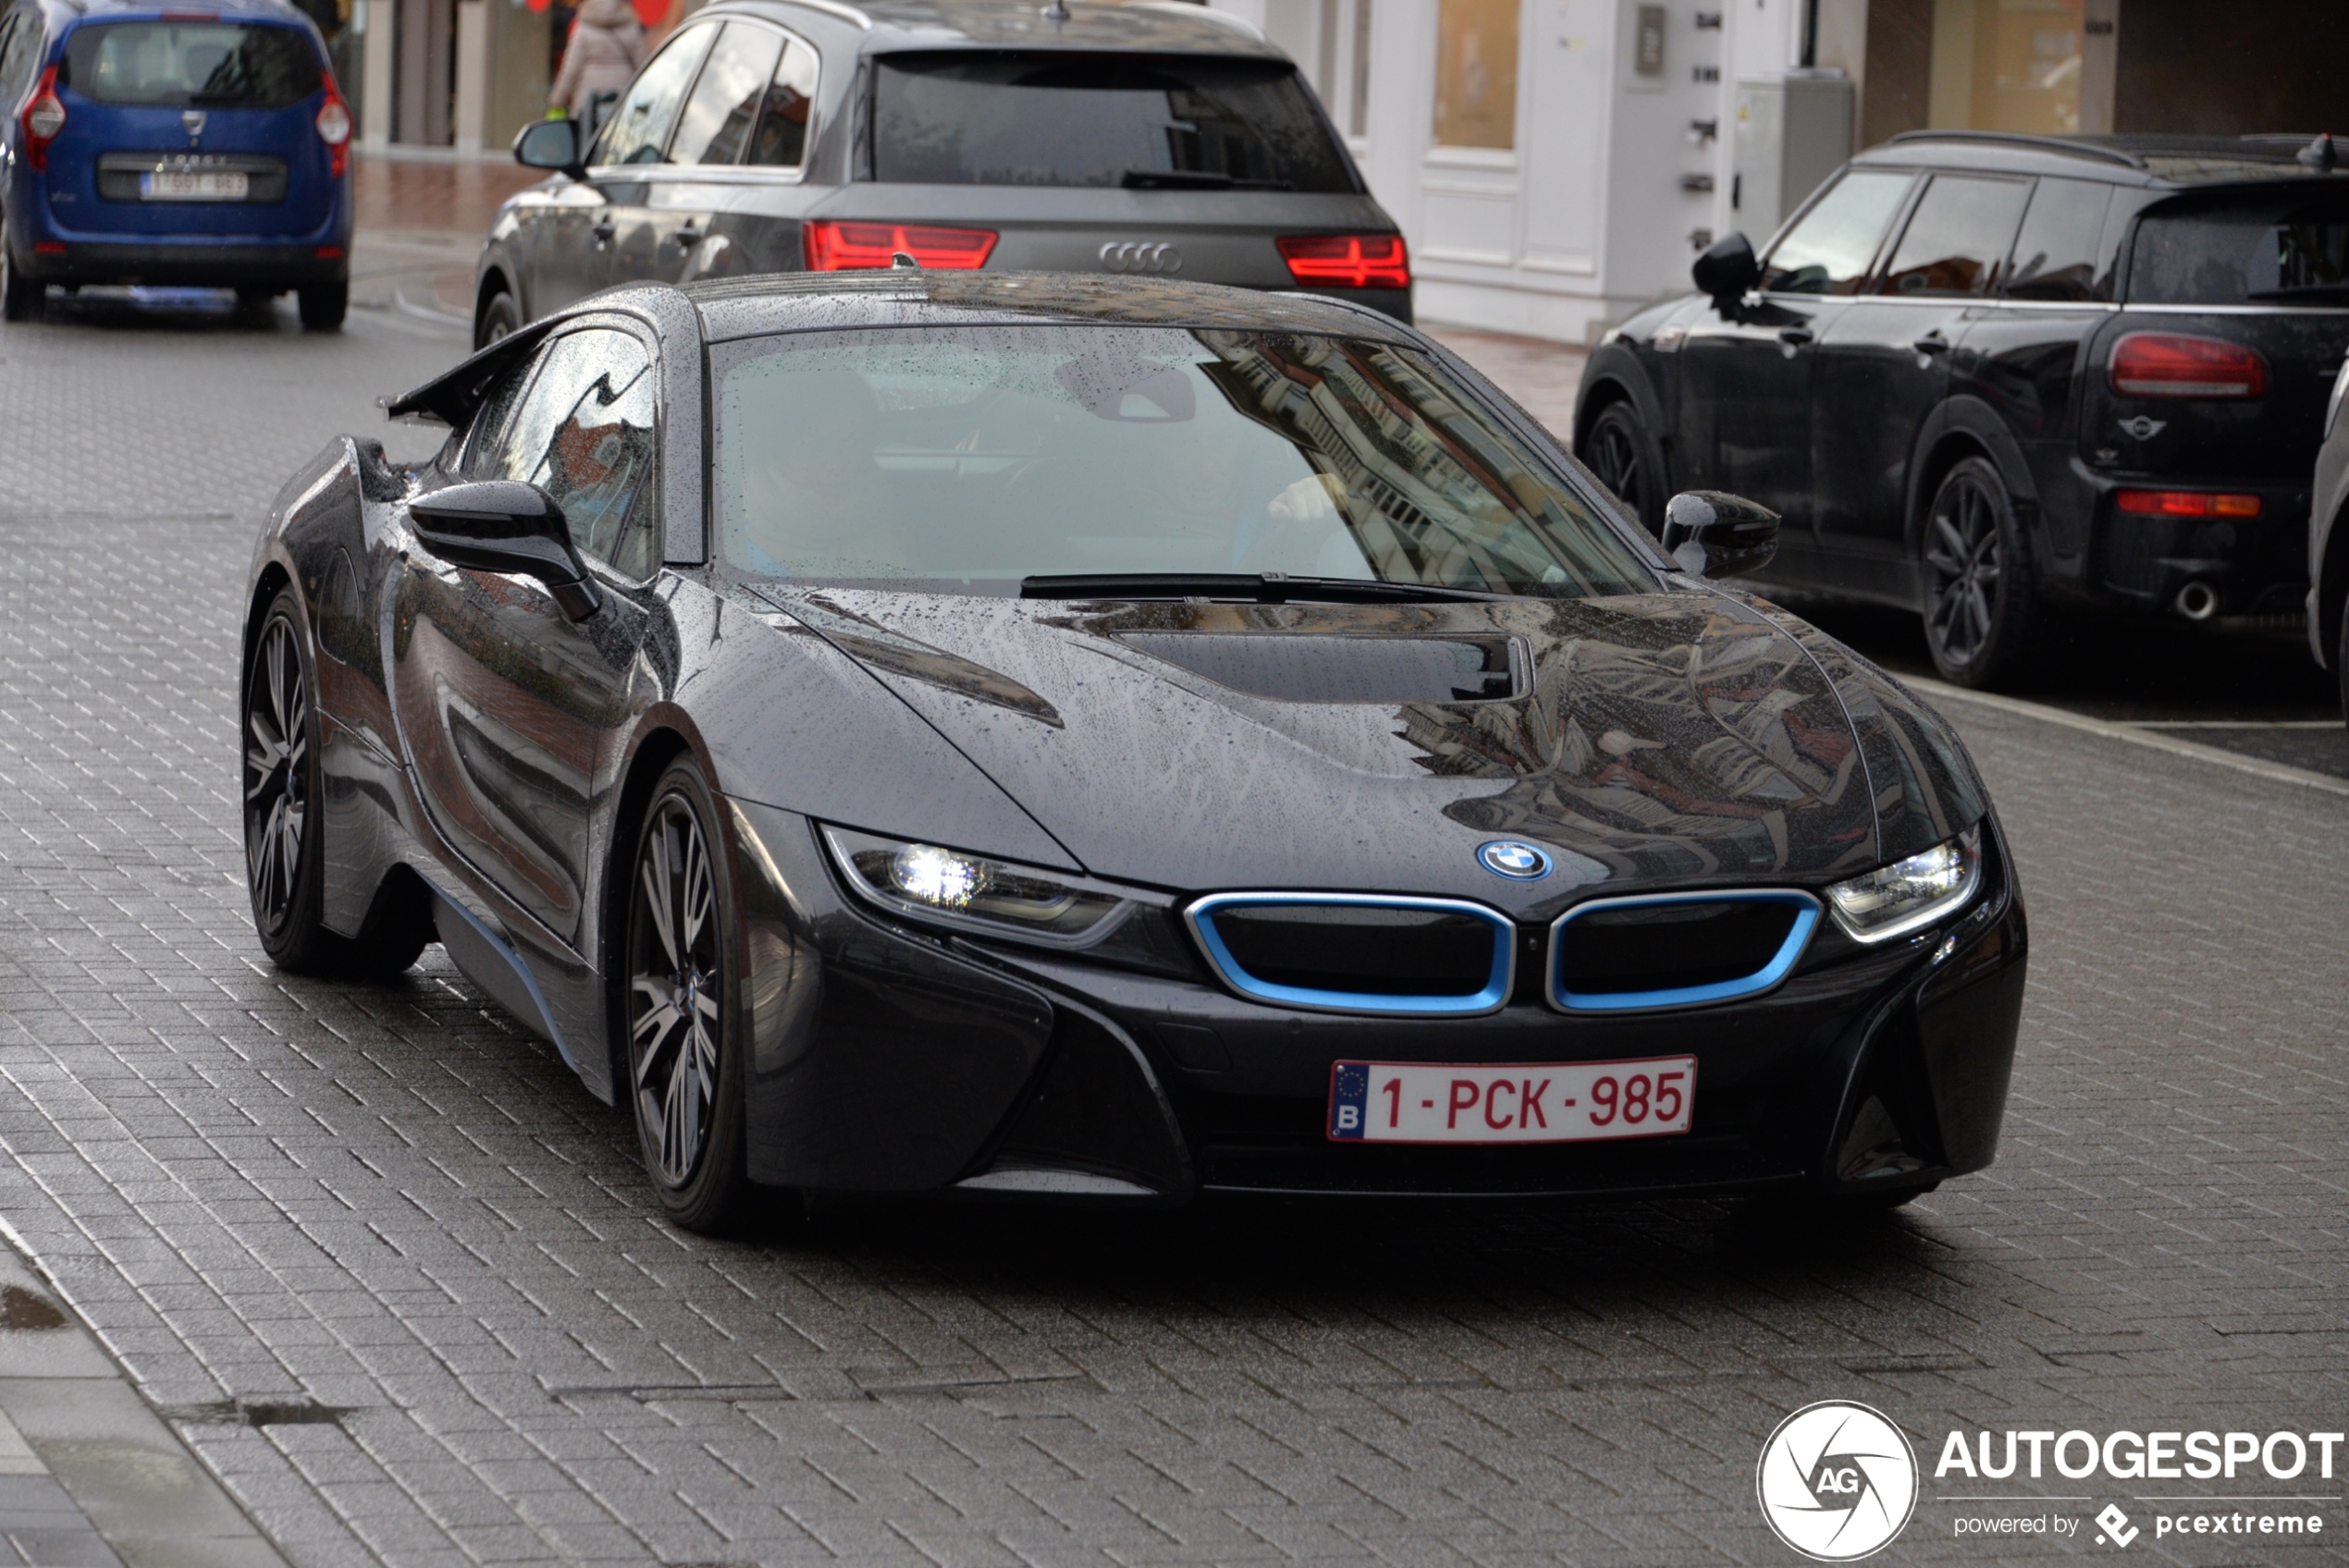 Is The BMW i8 A Genuine Exotic Car?